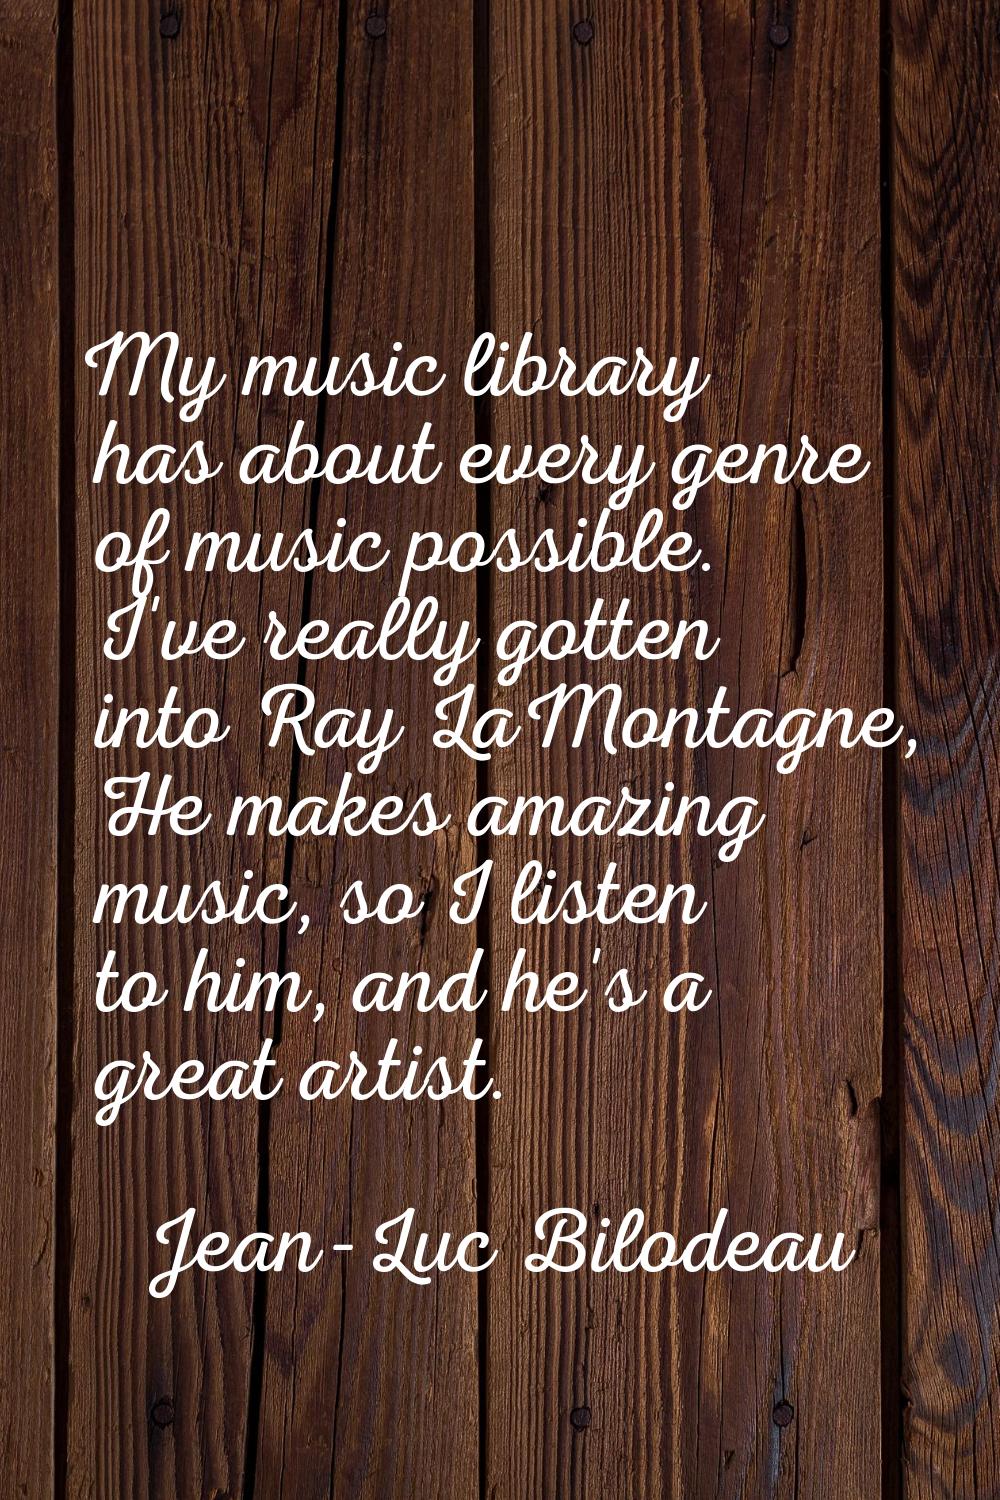 My music library has about every genre of music possible. I've really gotten into Ray LaMontagne, H